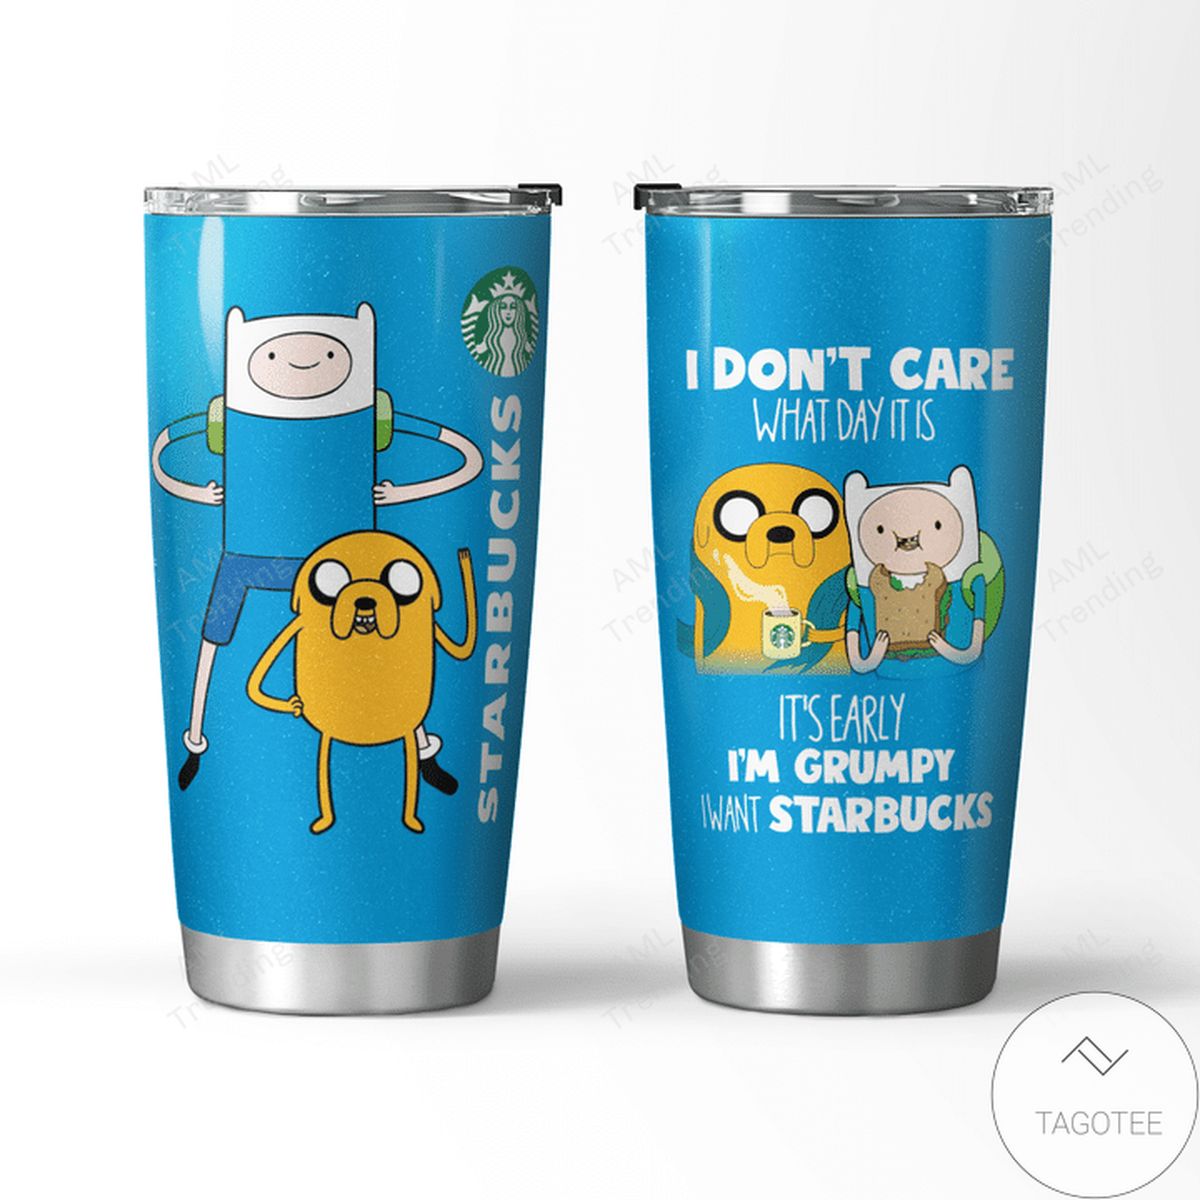 Starbucks I Don't Care What Day It Is Jake The Dog Finn The Human Tumbler